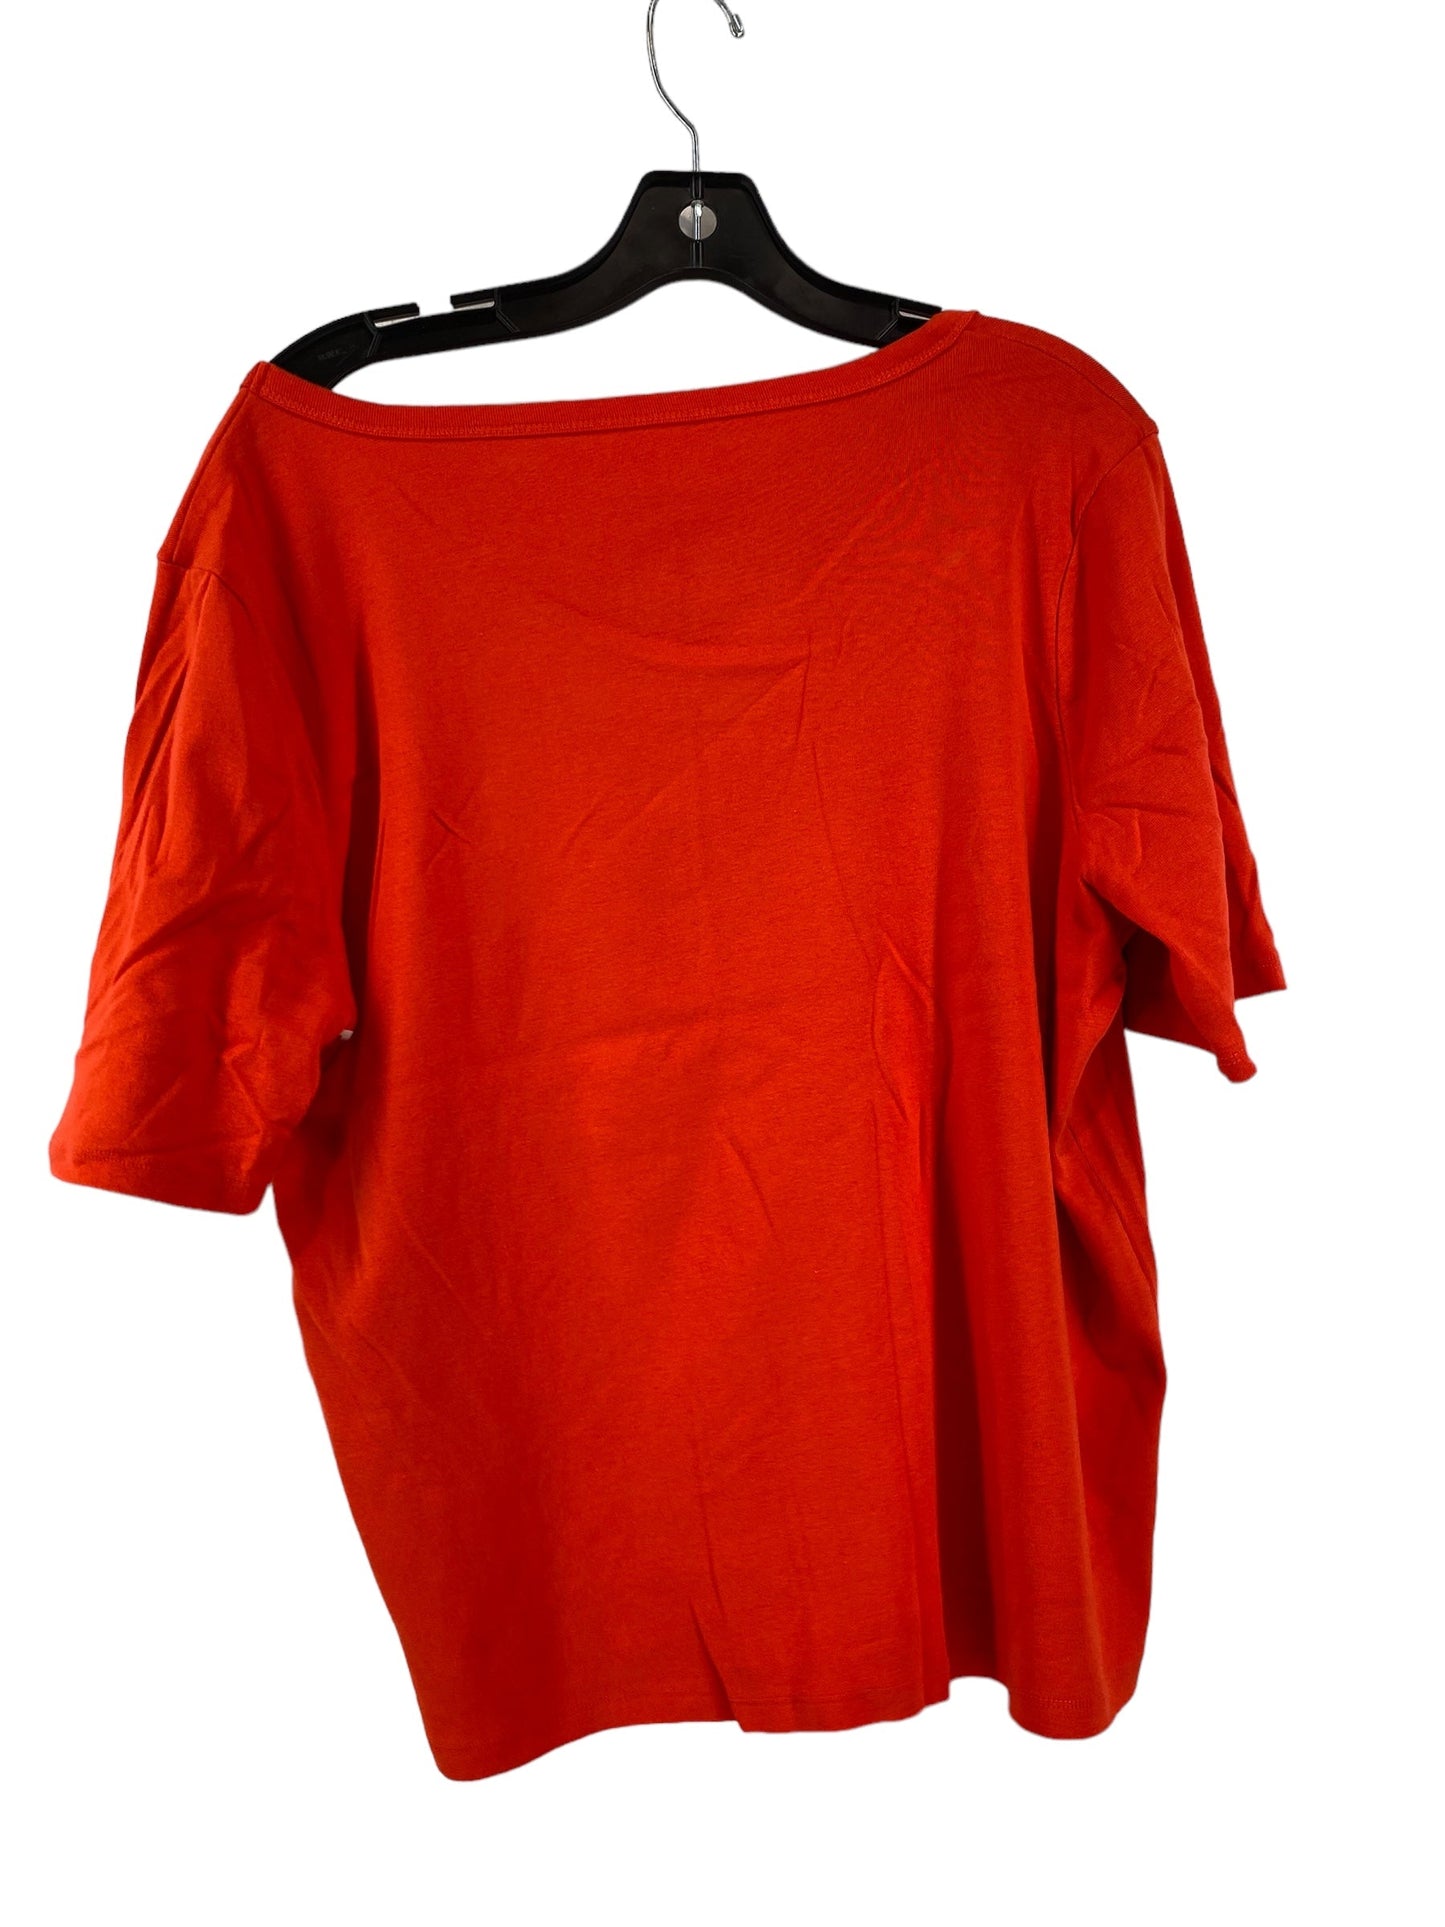 Red Top Short Sleeve Time And Tru, Size Xxl